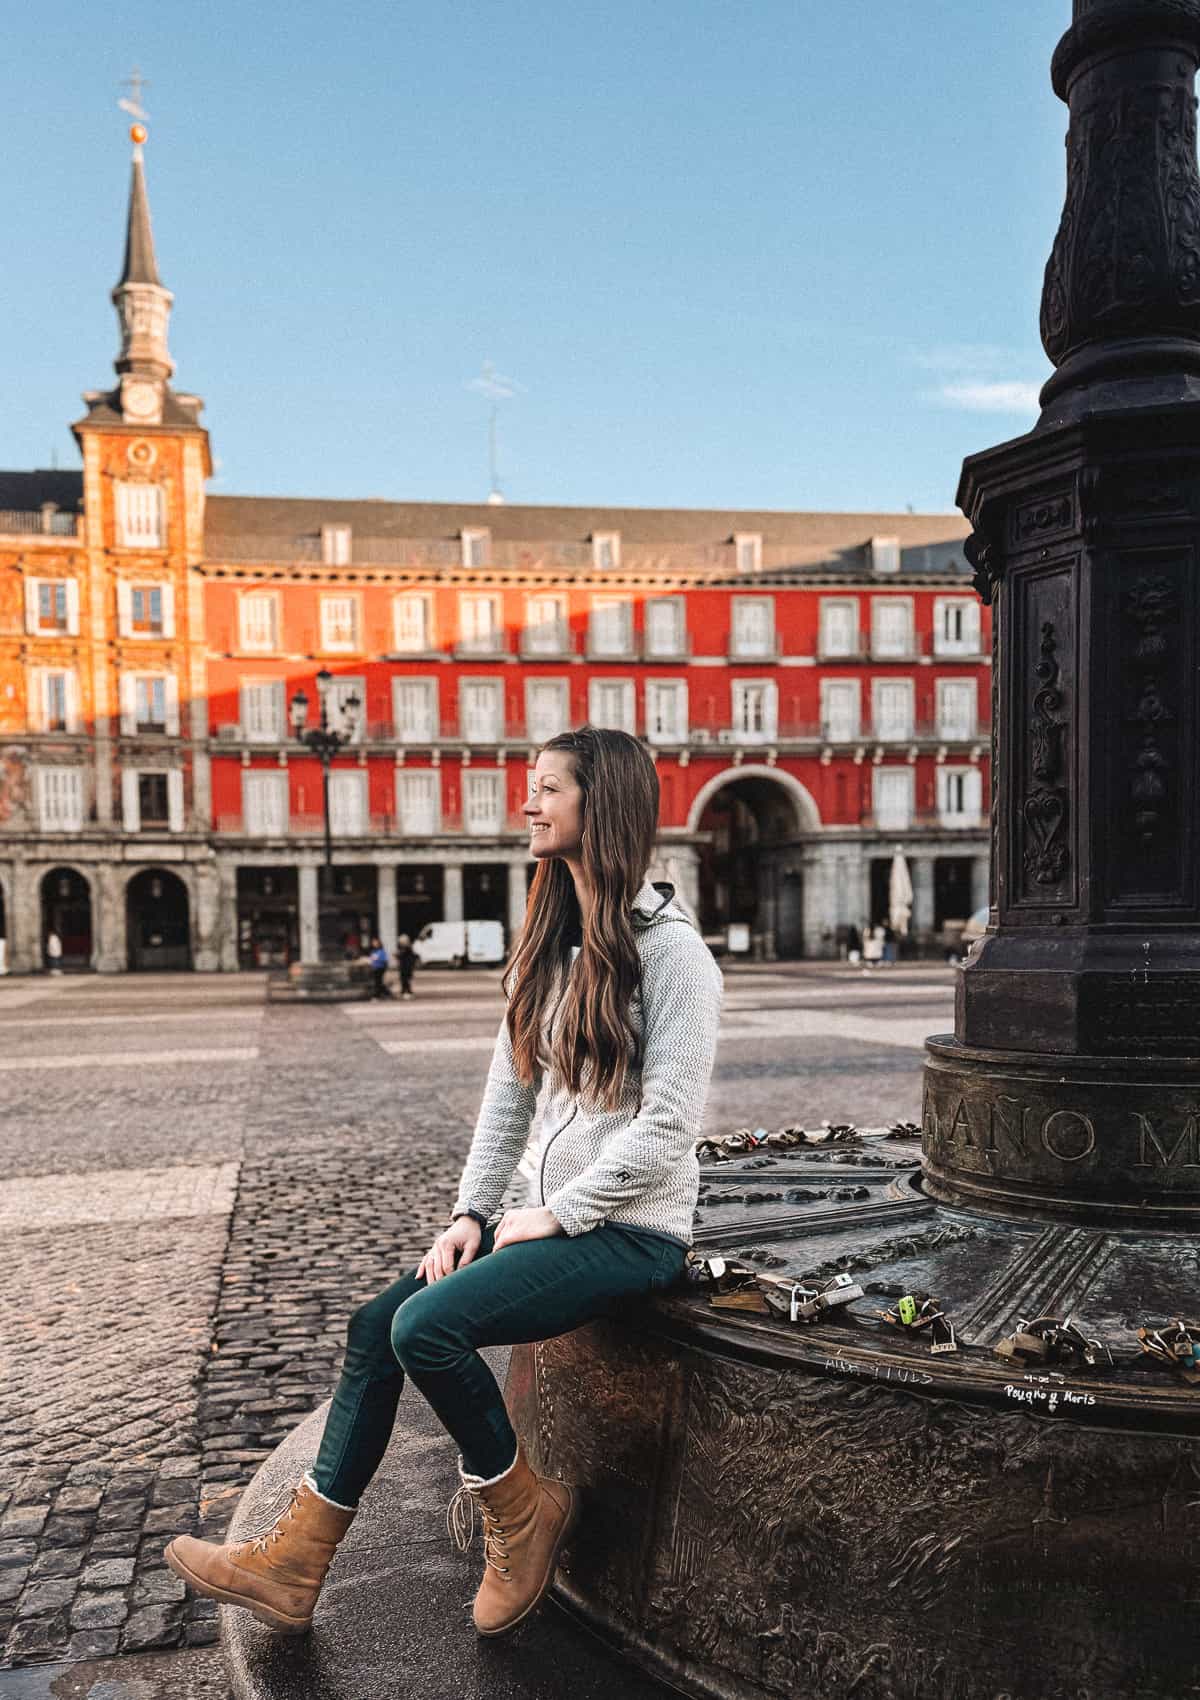 A woman sits contentedly at the base of an ornate lamppost in Plaza Mayor, Madrid, with the square's iconic red facades and arched portals in the background, while love locks adorn the post, symbolizing the romance of the city.